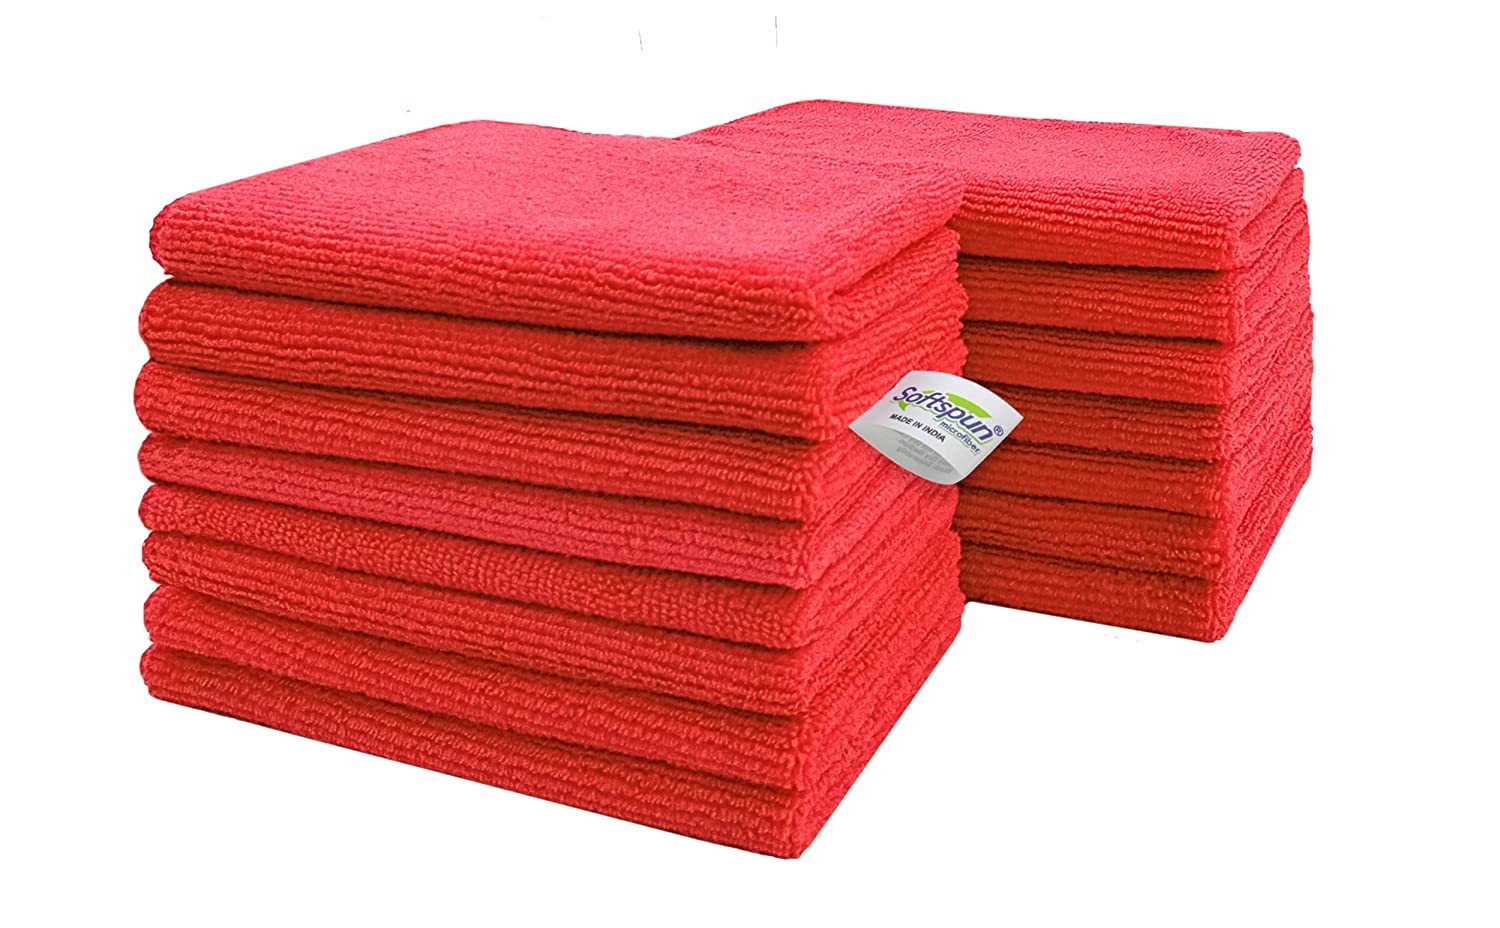 SOFTSPUN Microfiber Small Wipes 20x30 Cms, 15 Piece Towel Set, 340 GSM Multi-Purpose Super Soft Absorbent Cleaning Towels, Cleans & Polishes Everything in Your Home, Kitchen & Office.